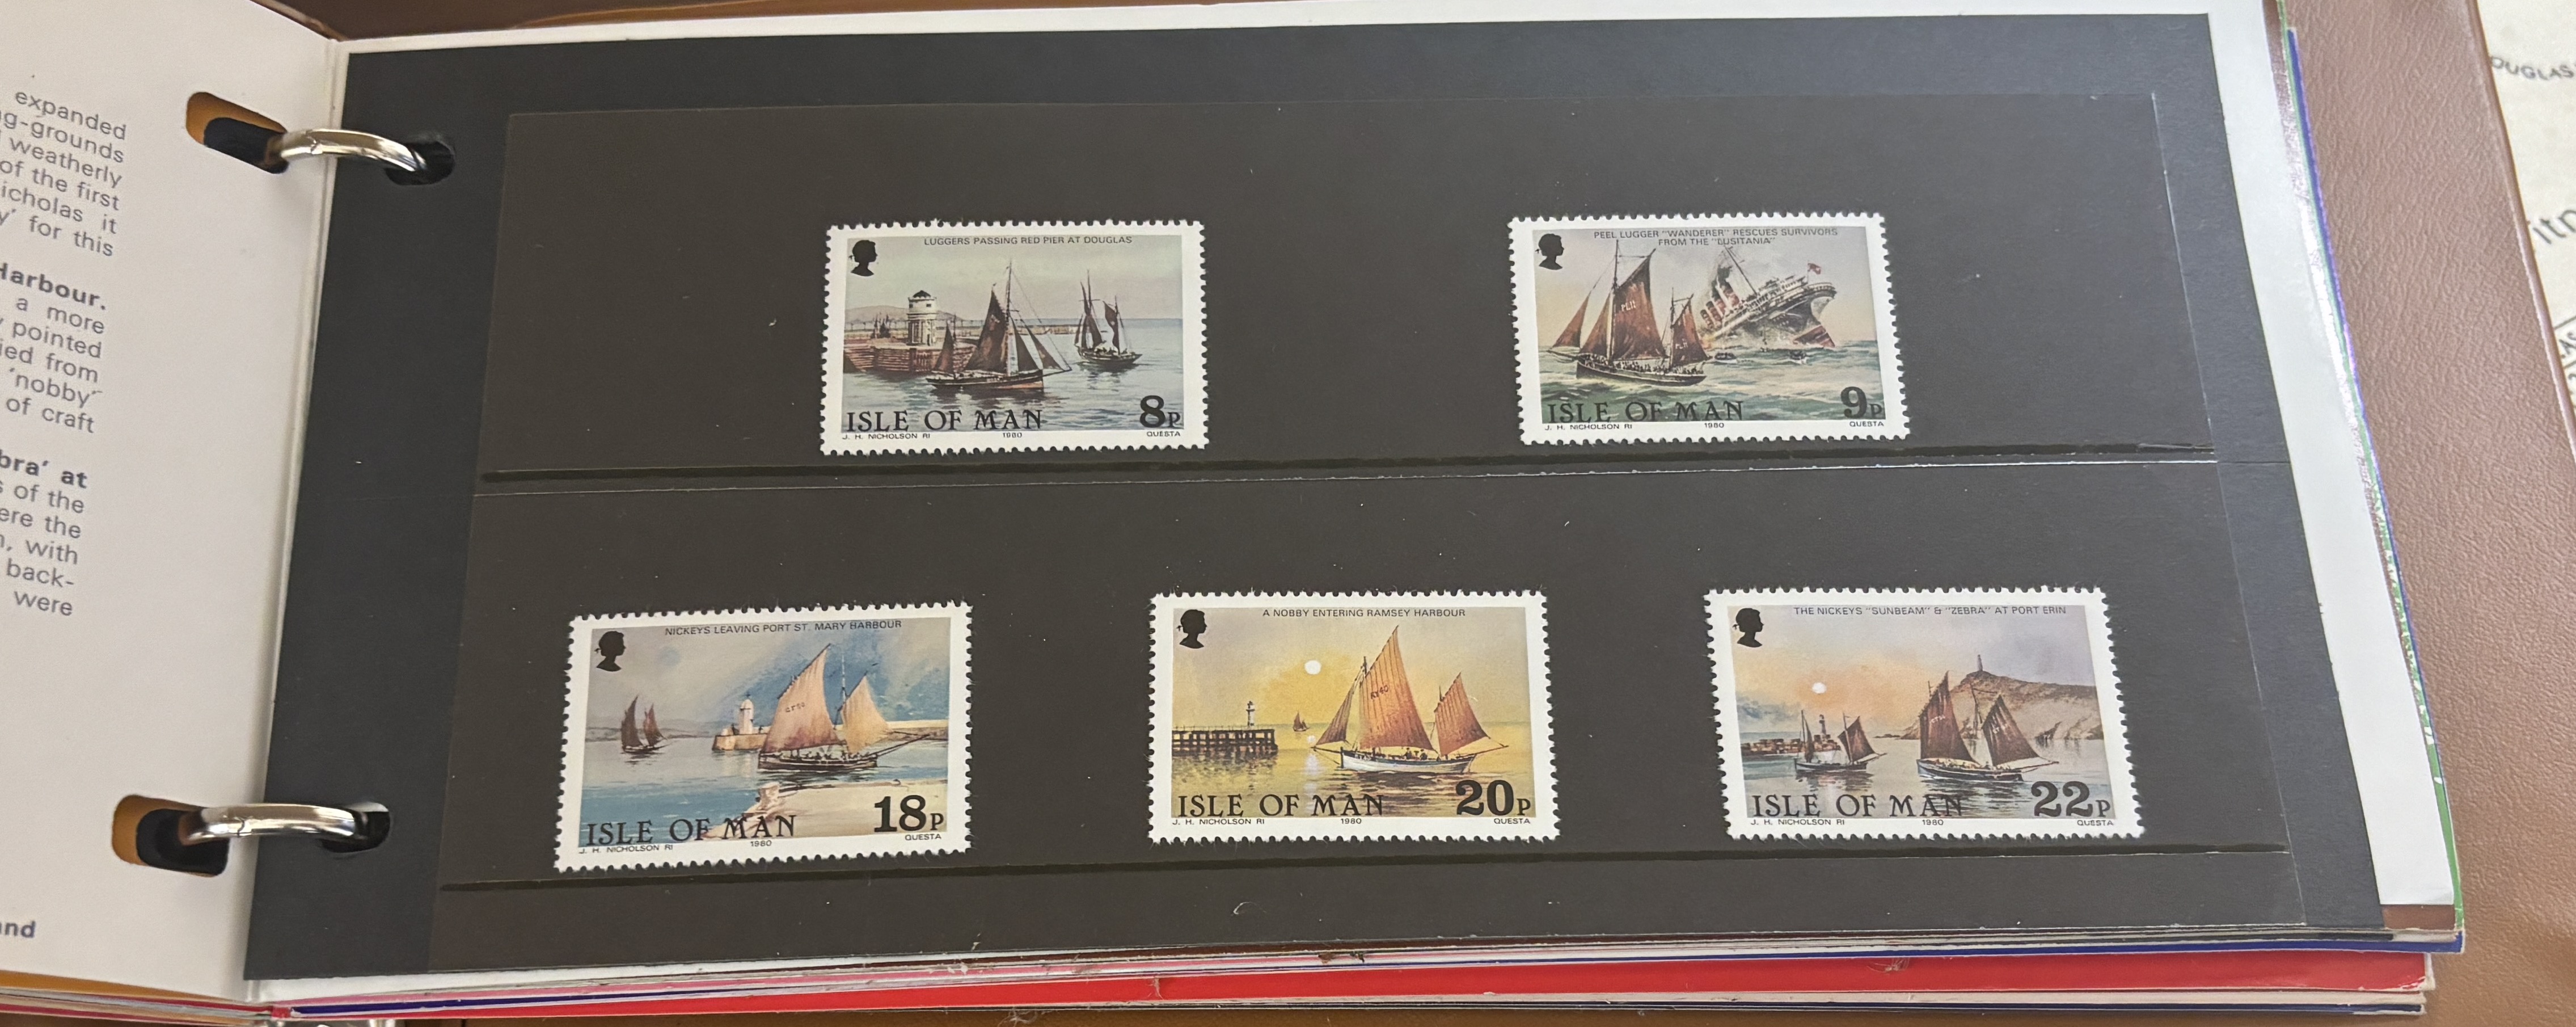 First Day Covers - Isle of Man, 25th anniversary of the coronation of HM QE2, Commonwealth, 80th birthday Queen Mother, United Nations, leaders of the world, London 1980, Malaysia, Royal Mint, Hong Kong, SAI history of a